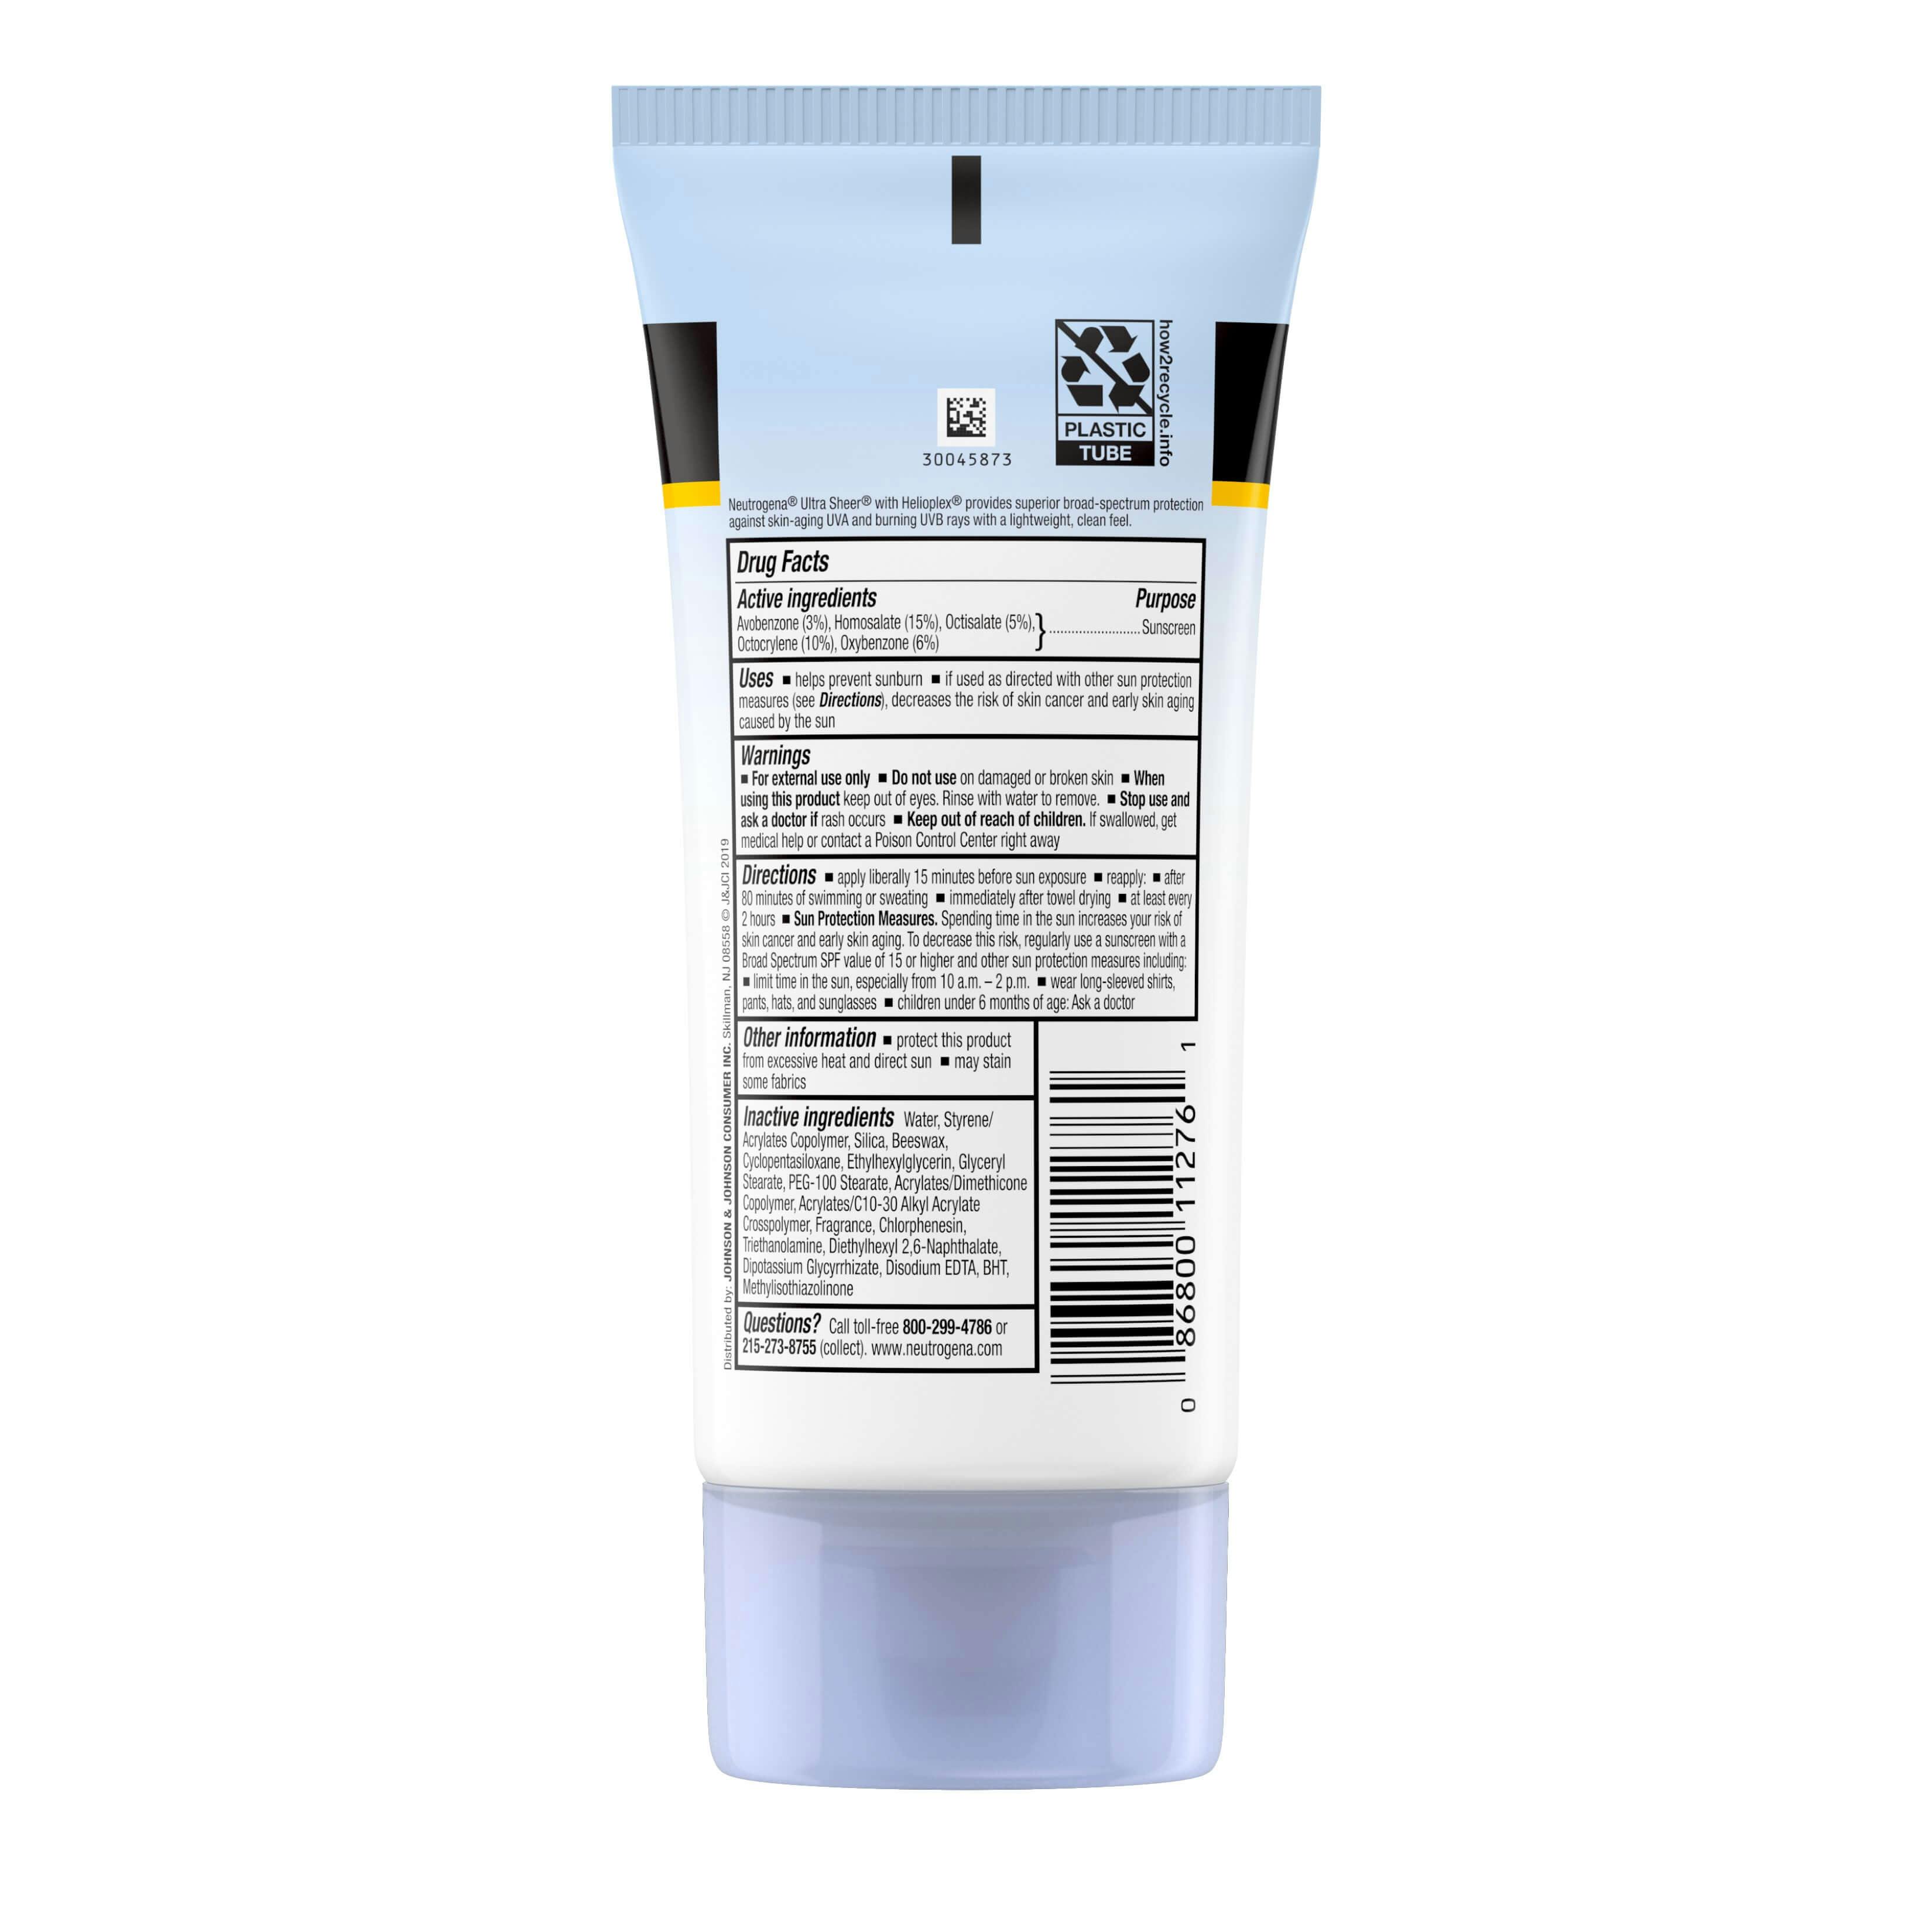 dry touch sunscreen